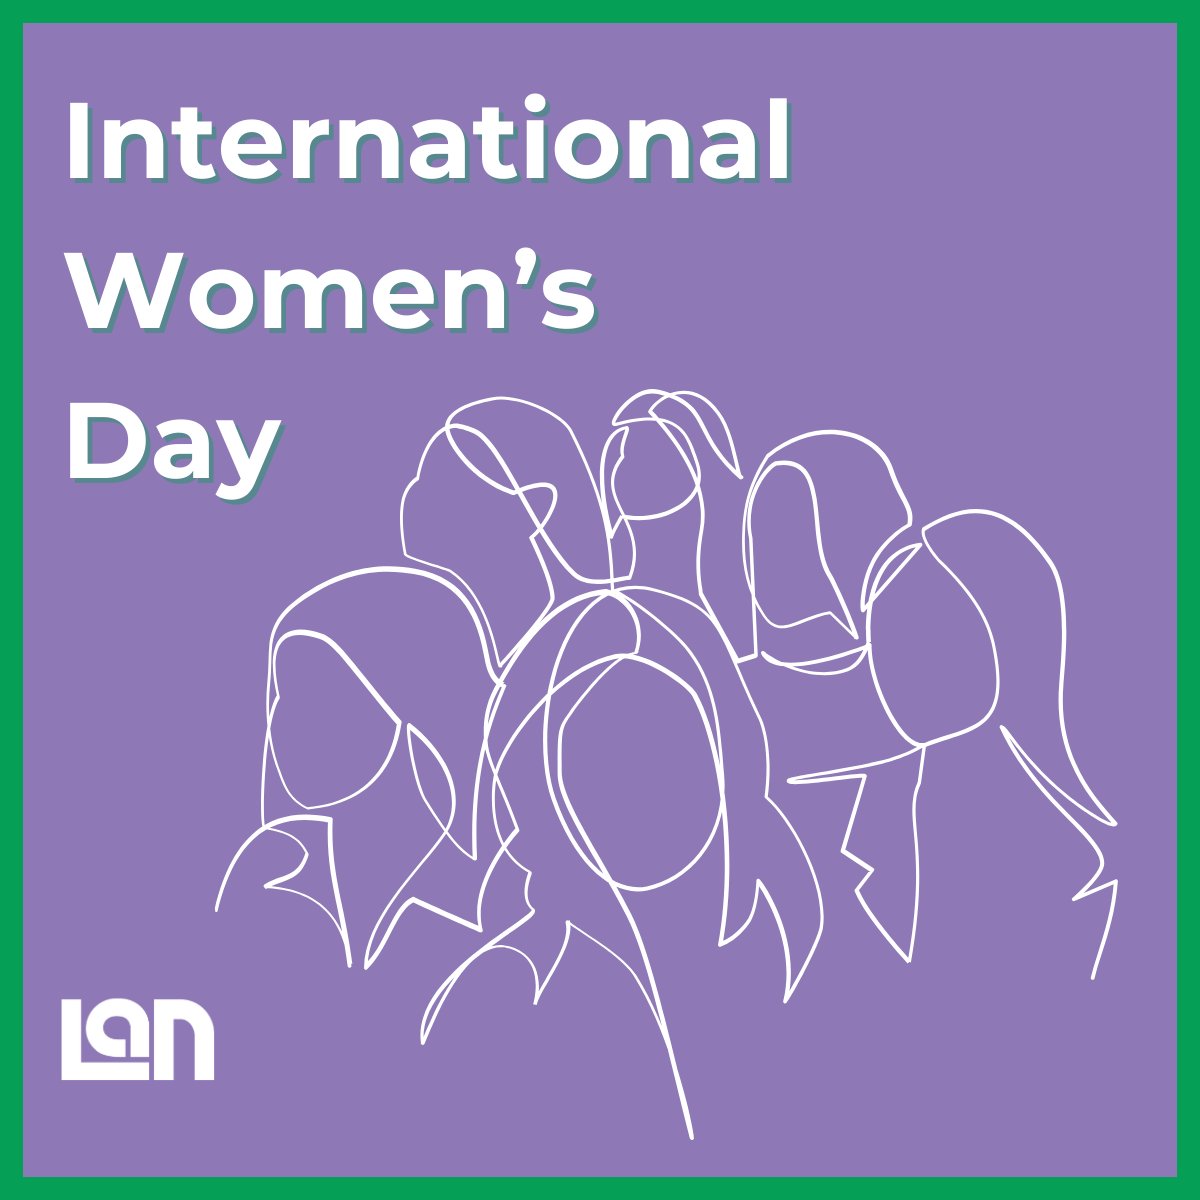 Happy International Women’s Day! We are celebrating progress, resilience, and the undying spirit of women around the globe. Here's to recognizing and supporting one another, not just today but every day. #InternationalWomensDay #WomenEmplowerment #Equality